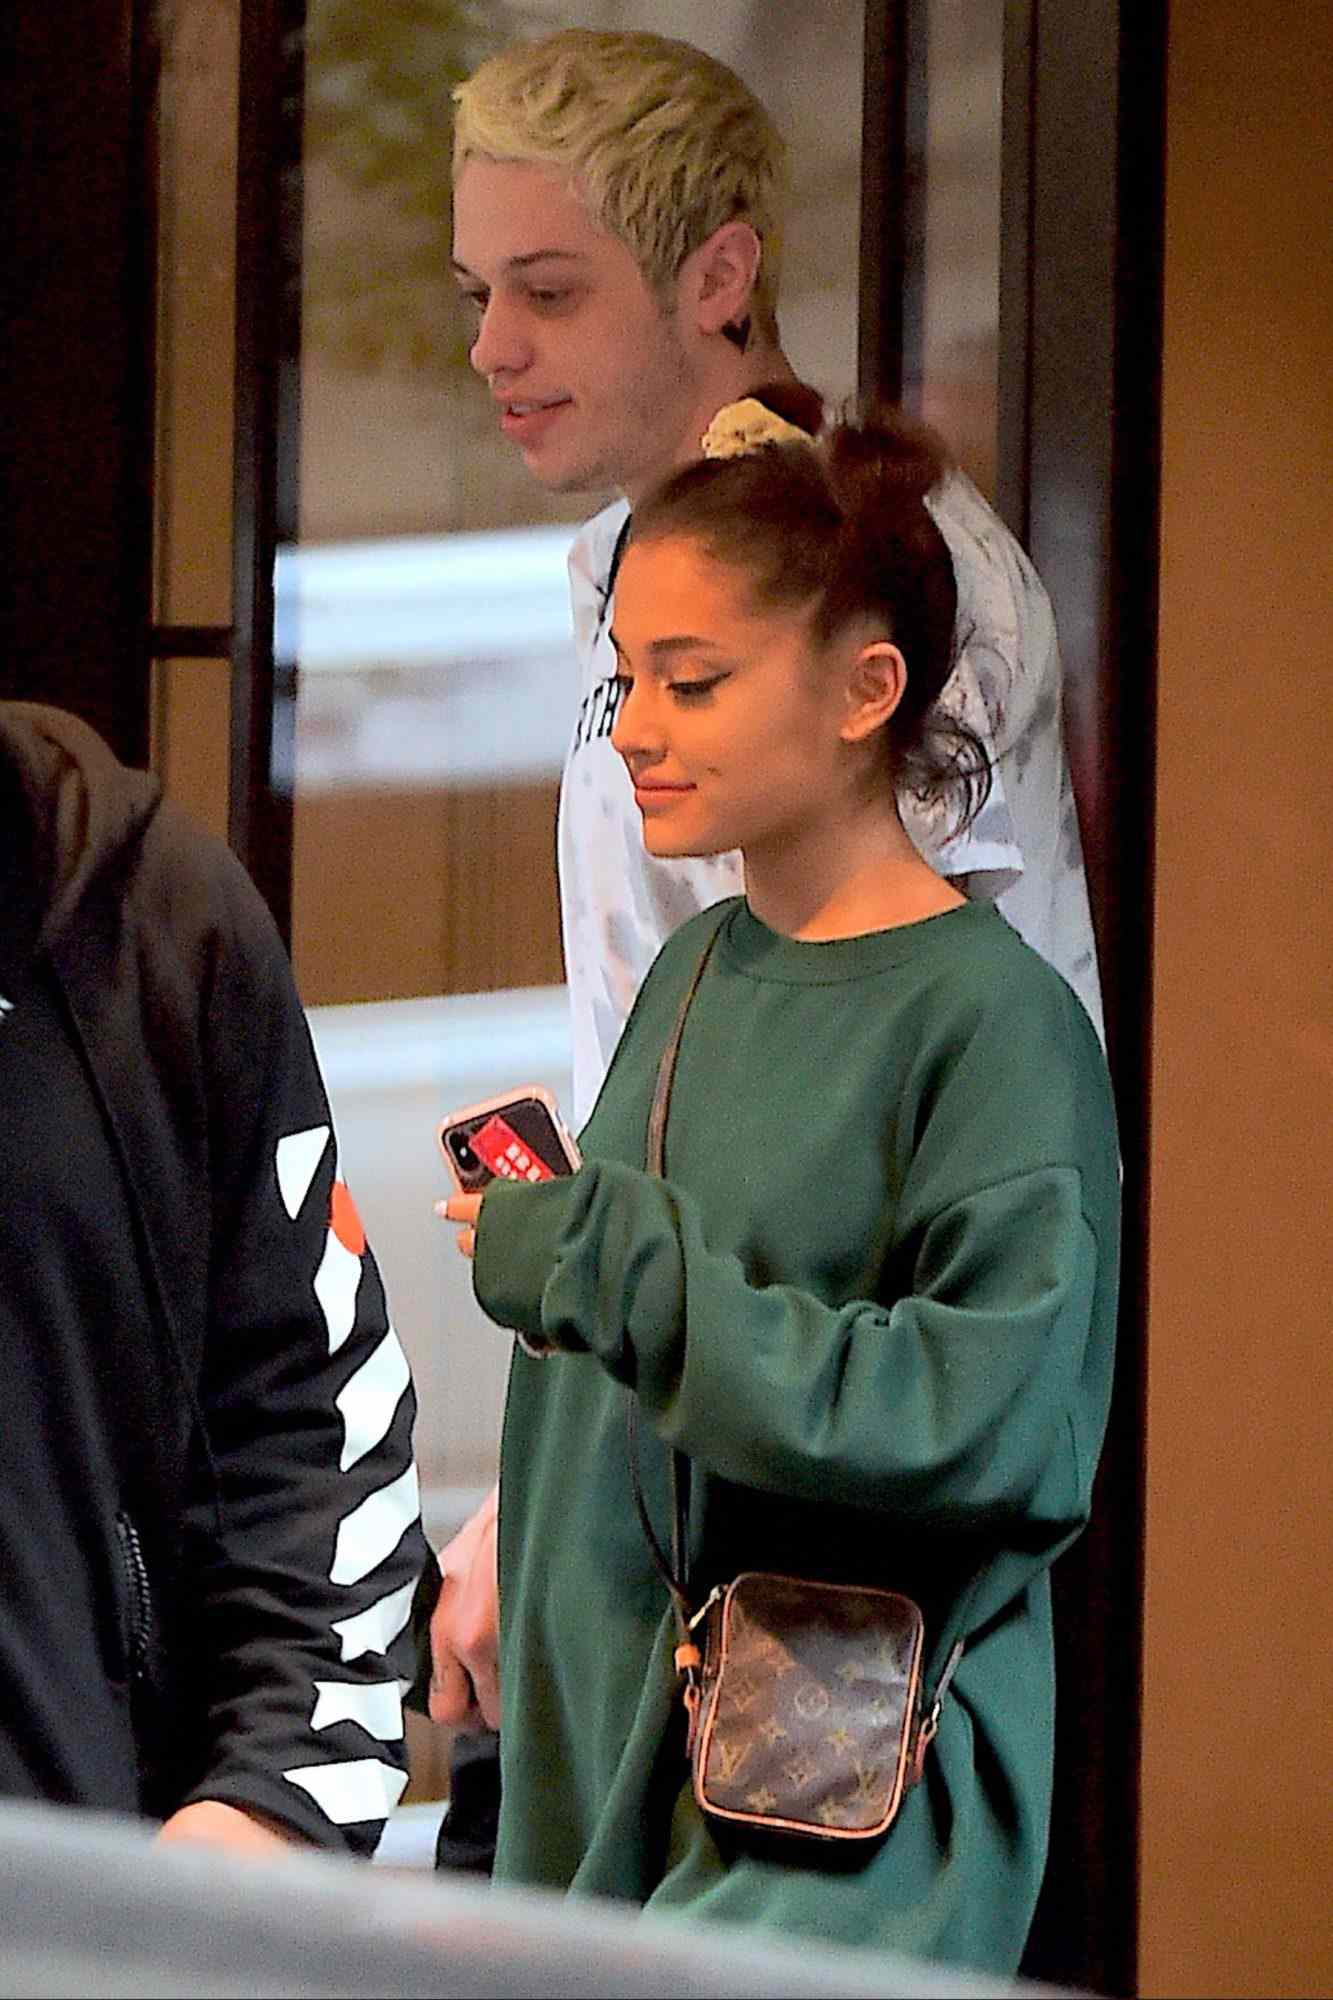 EXCLUSIVE: Has Pete Davidson altered his matching bunny tattoo? Davidson & Ariana Grande Spotted Together in NYC and a black heart seems to have replaced the infamous tattoo.